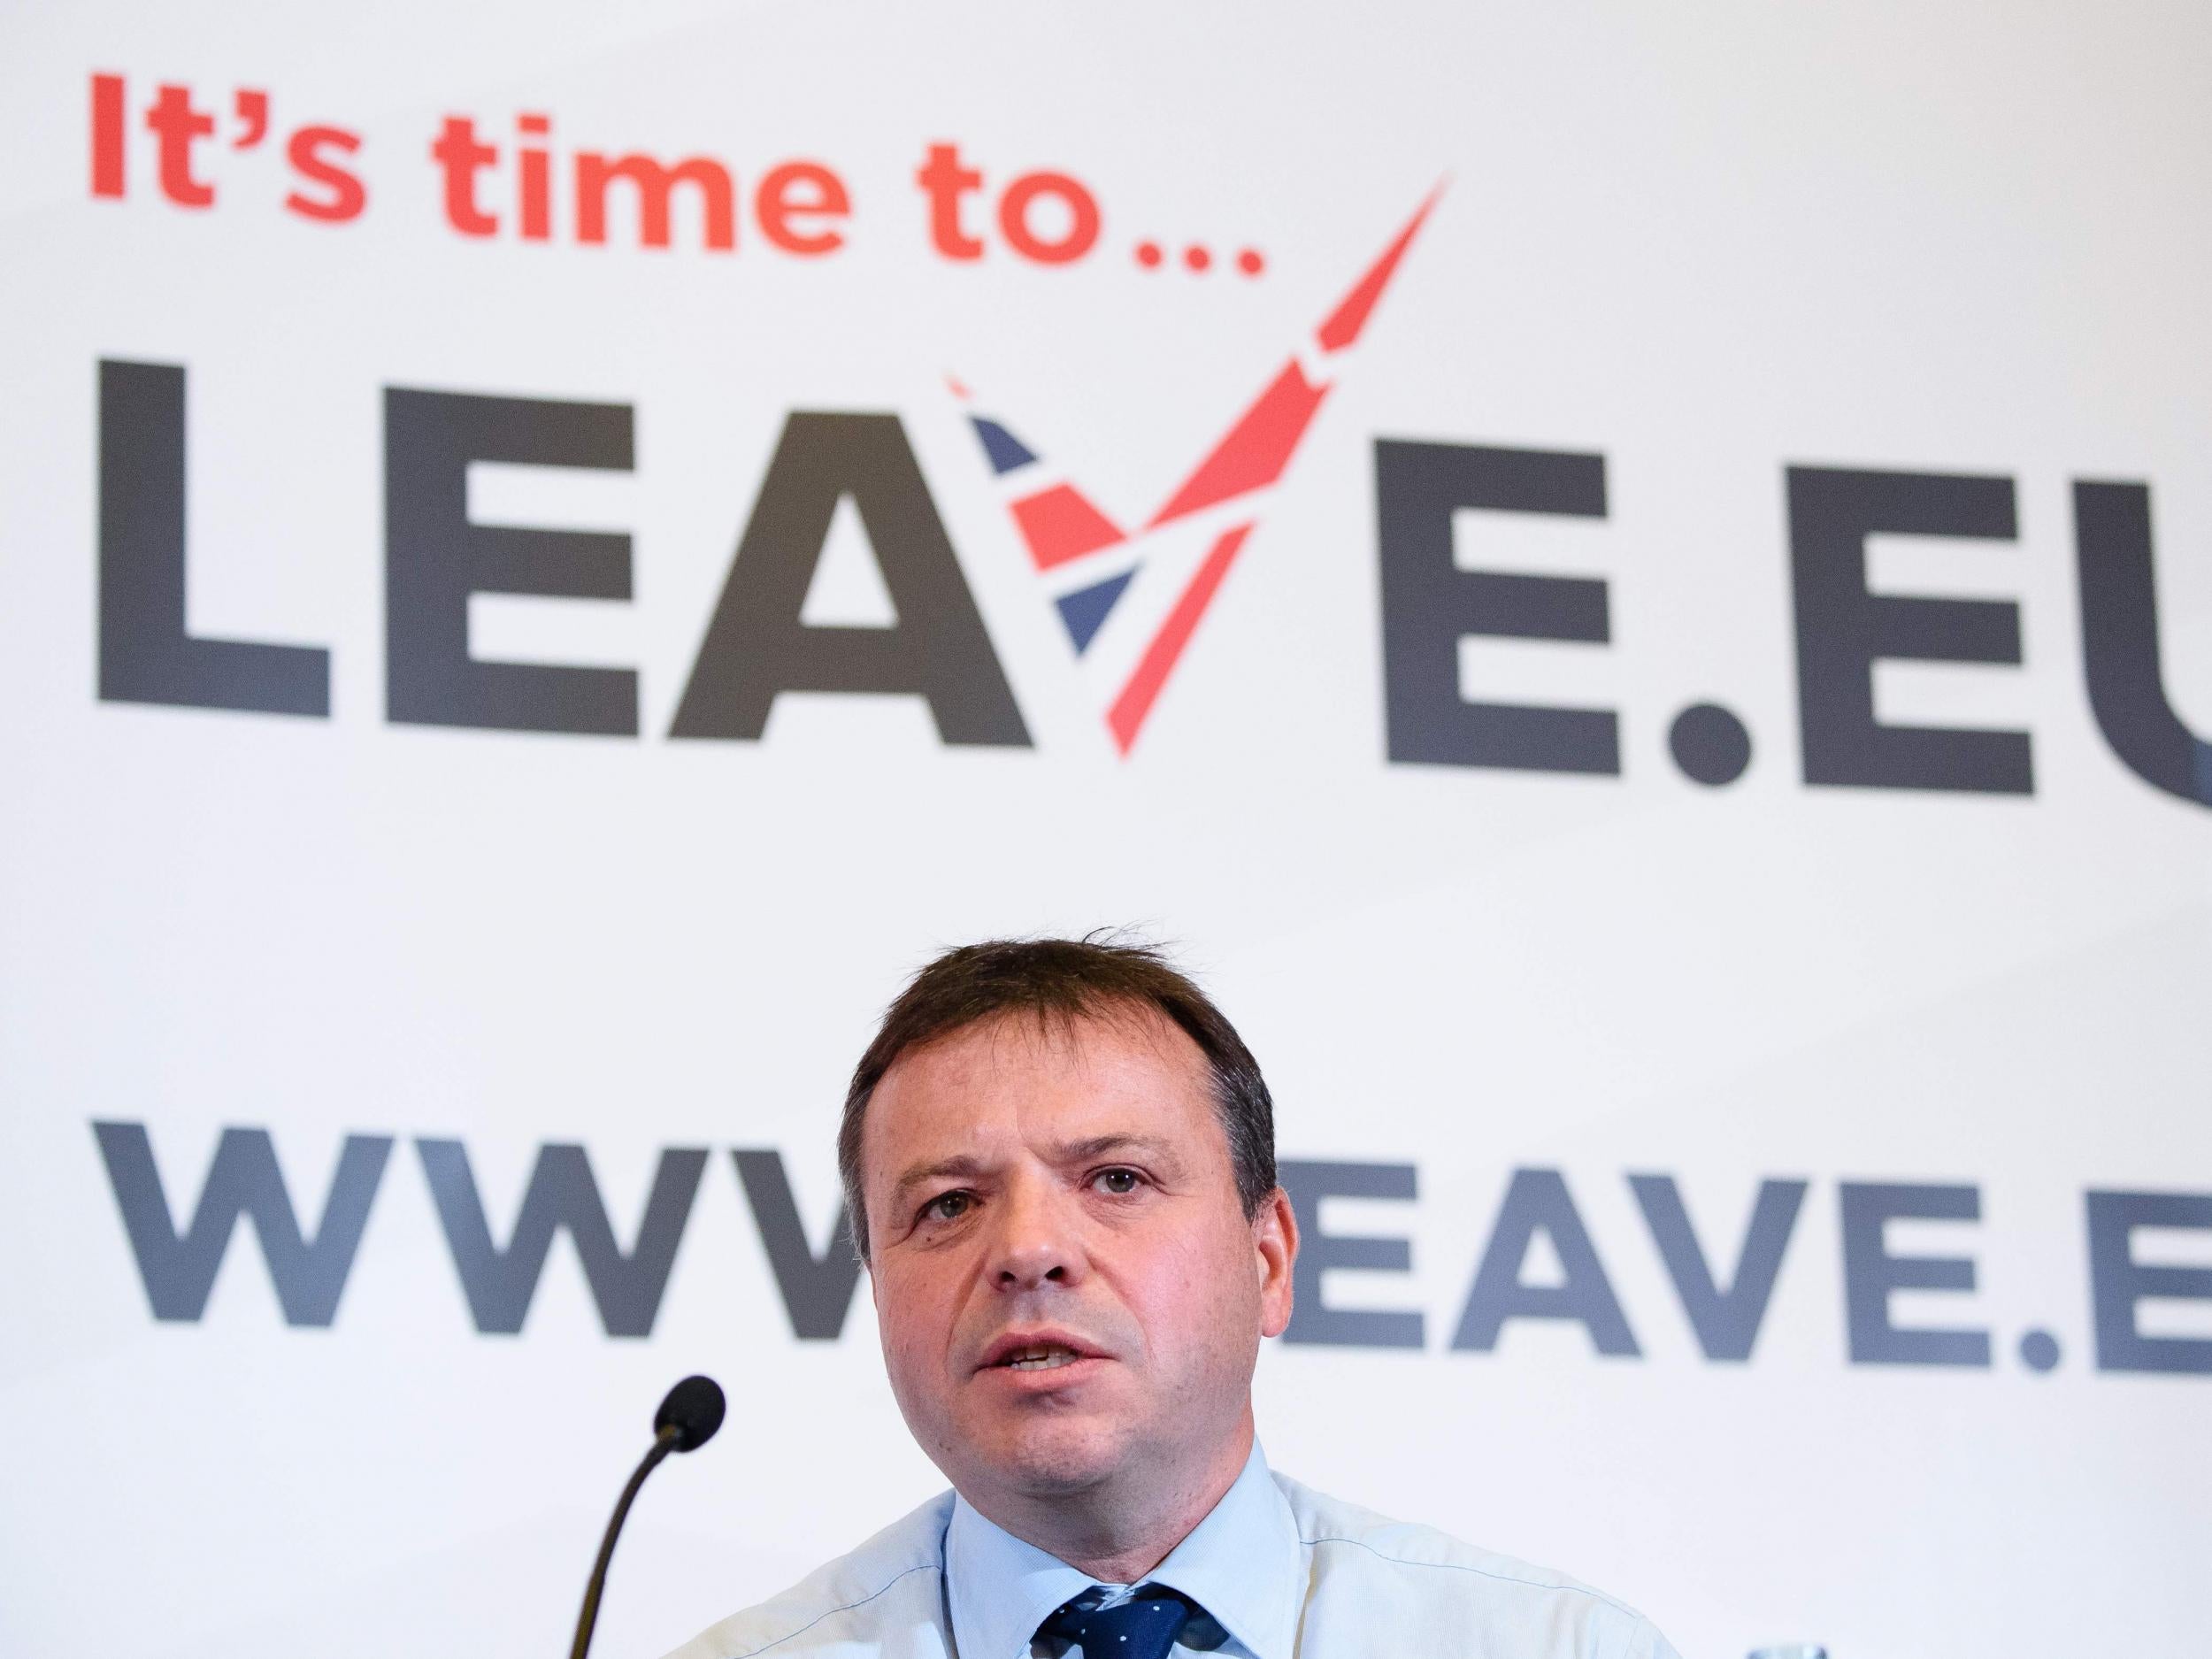 The Electoral Commission announced a £70,000 fine for Arron Banks from Leave.EU